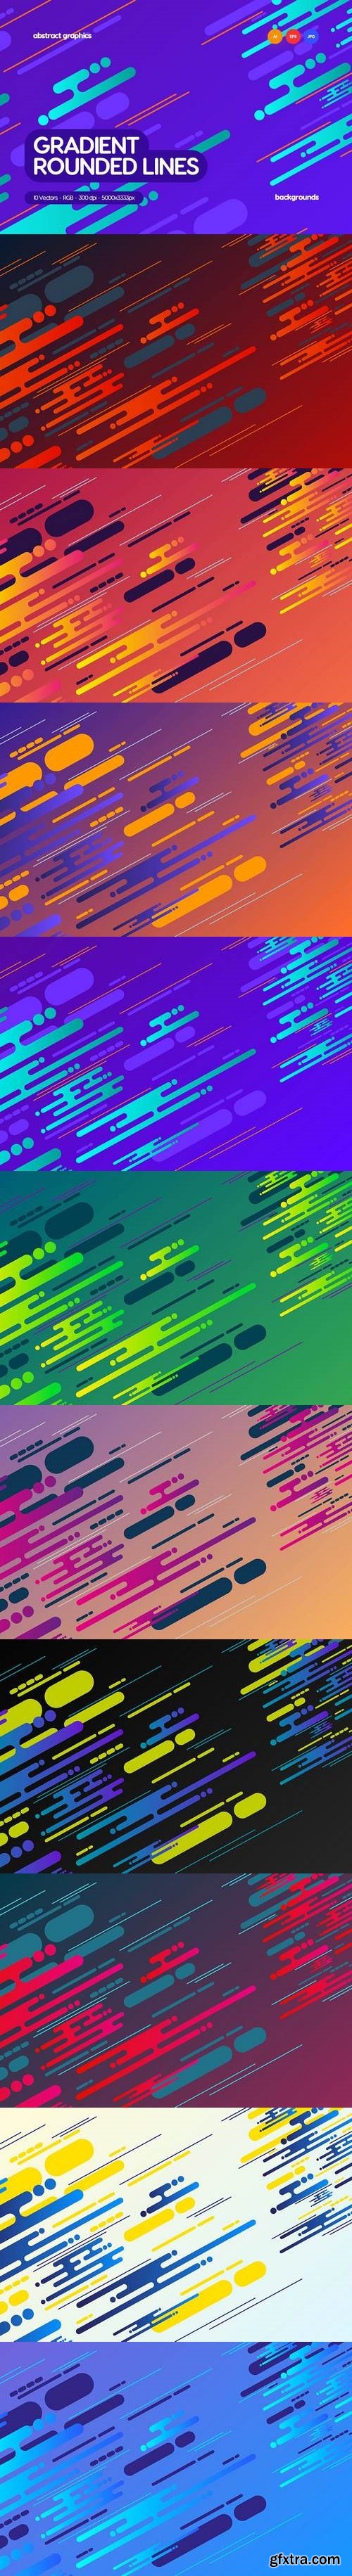 Gradient Rounded Lines Backgrounds